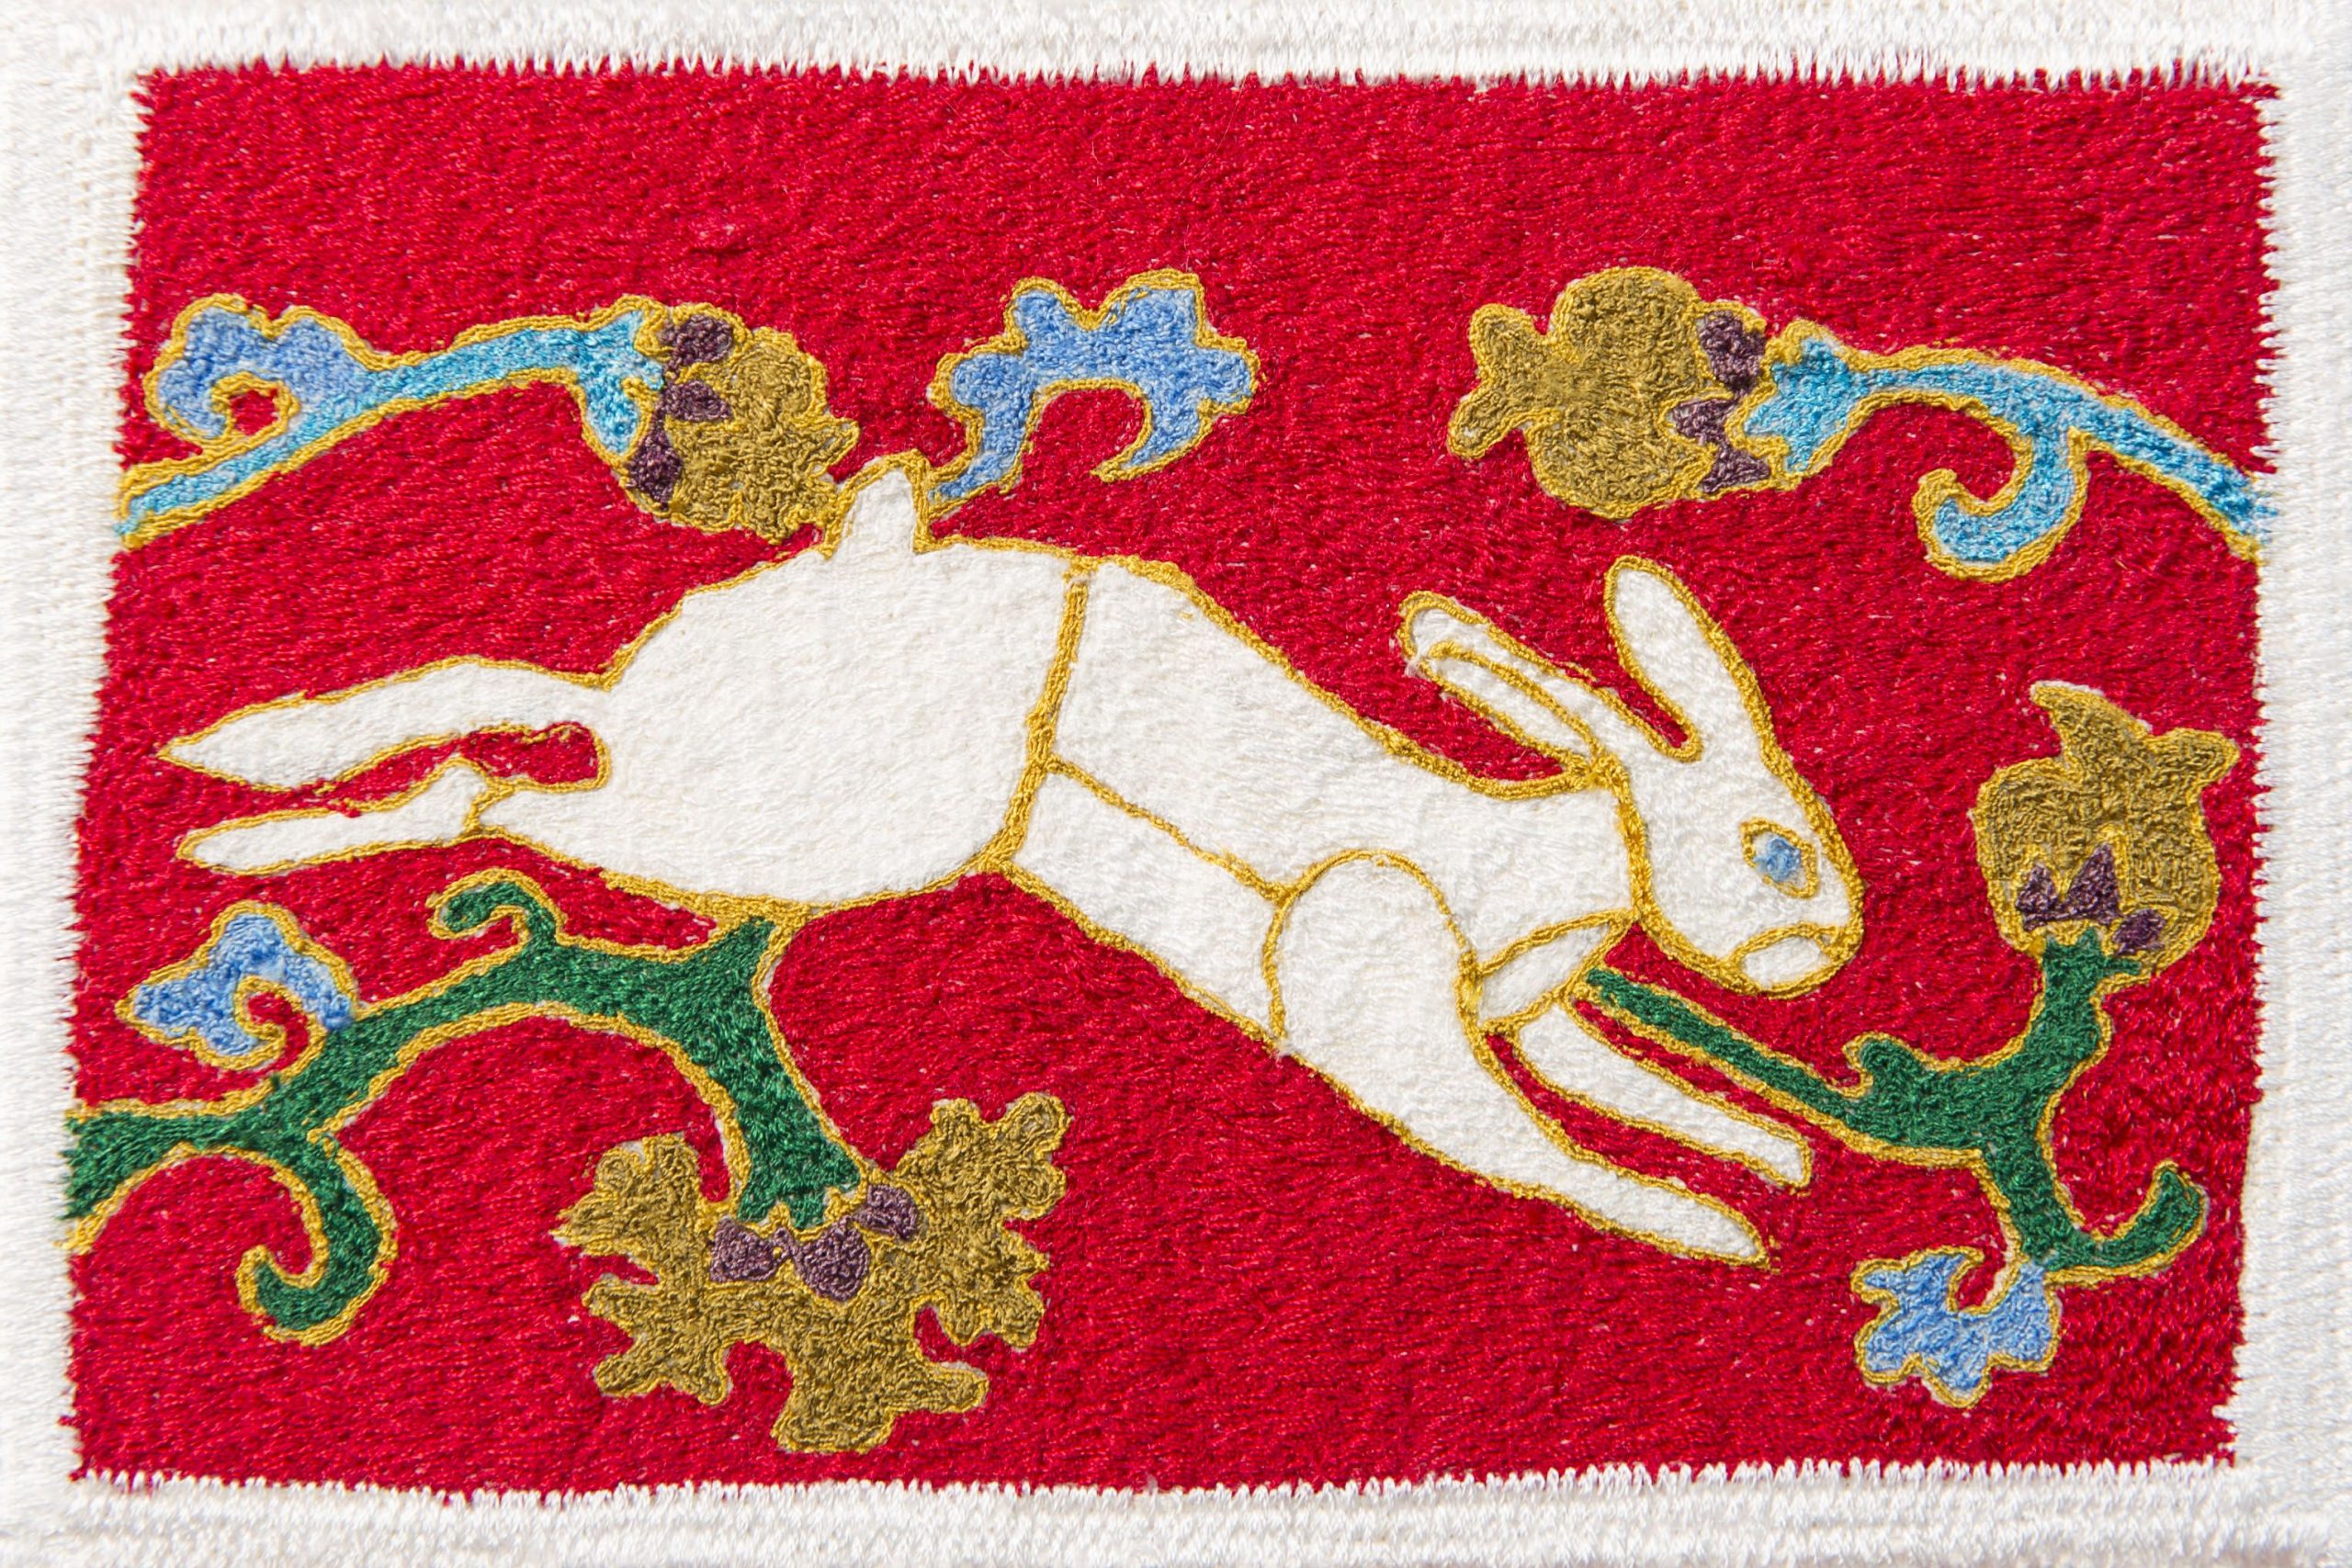 The Embroiderers’ Guild launches its new website